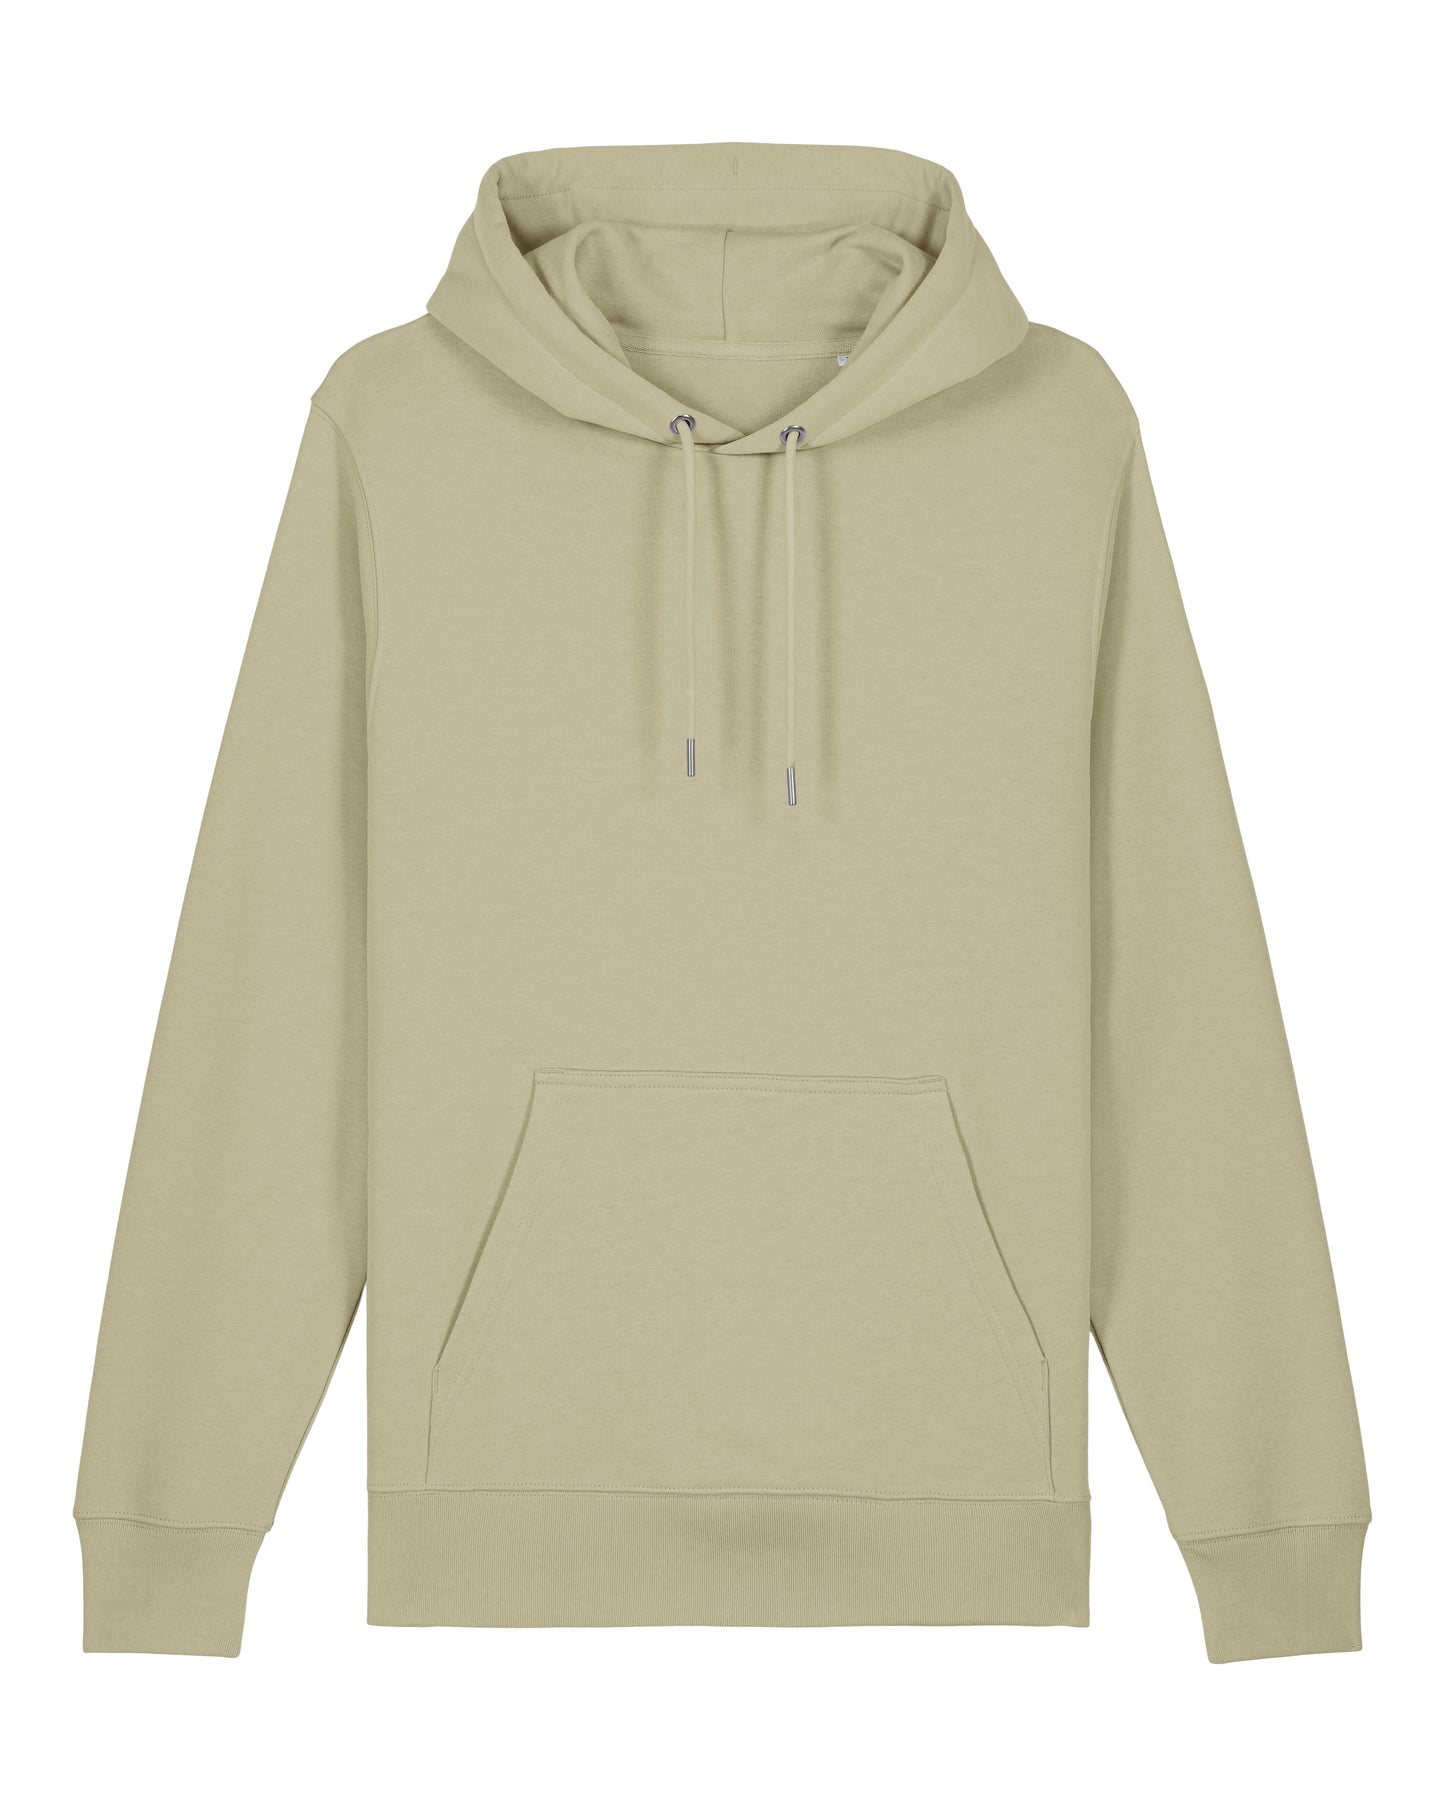 It Fits Ditcher - Unisex Regular Fit Hoodie - Terry lining